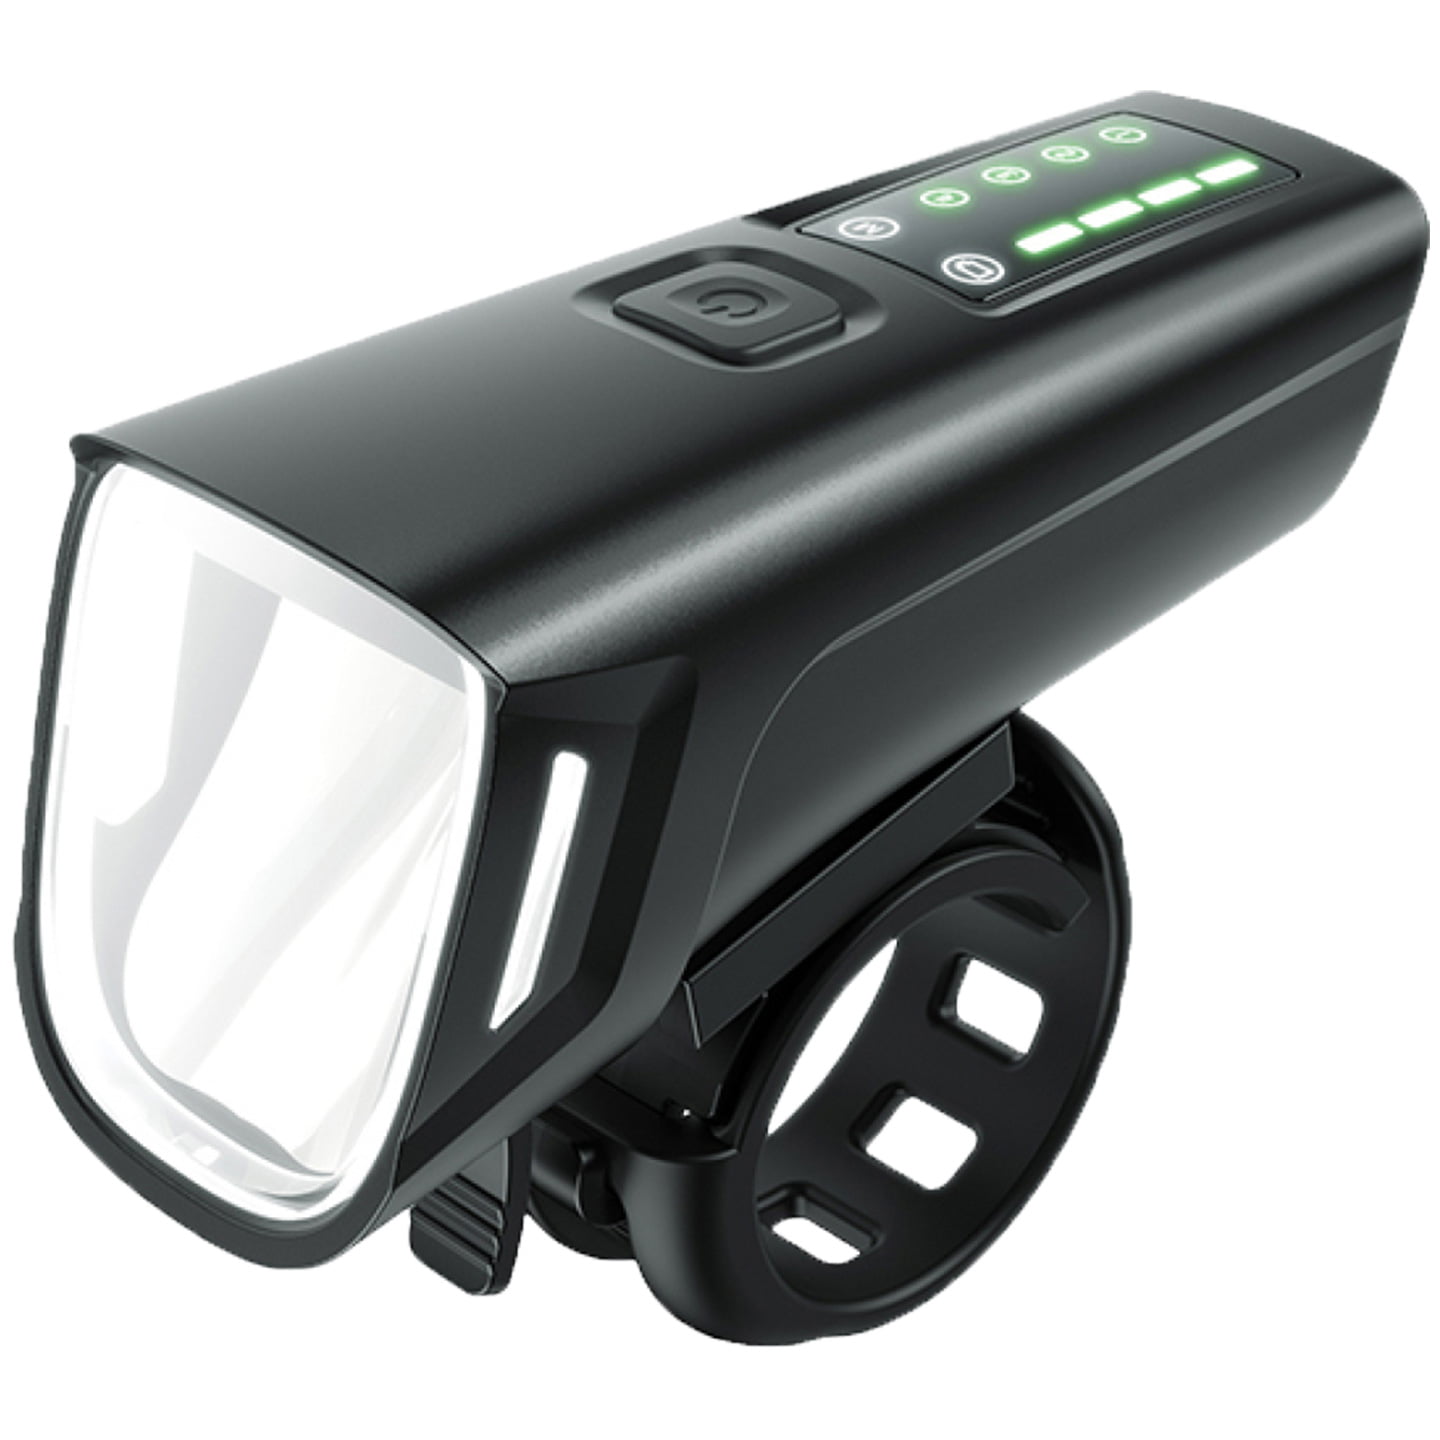 VOXOM Lv16 Bicycle Light, Bicycle light, Bike accessories